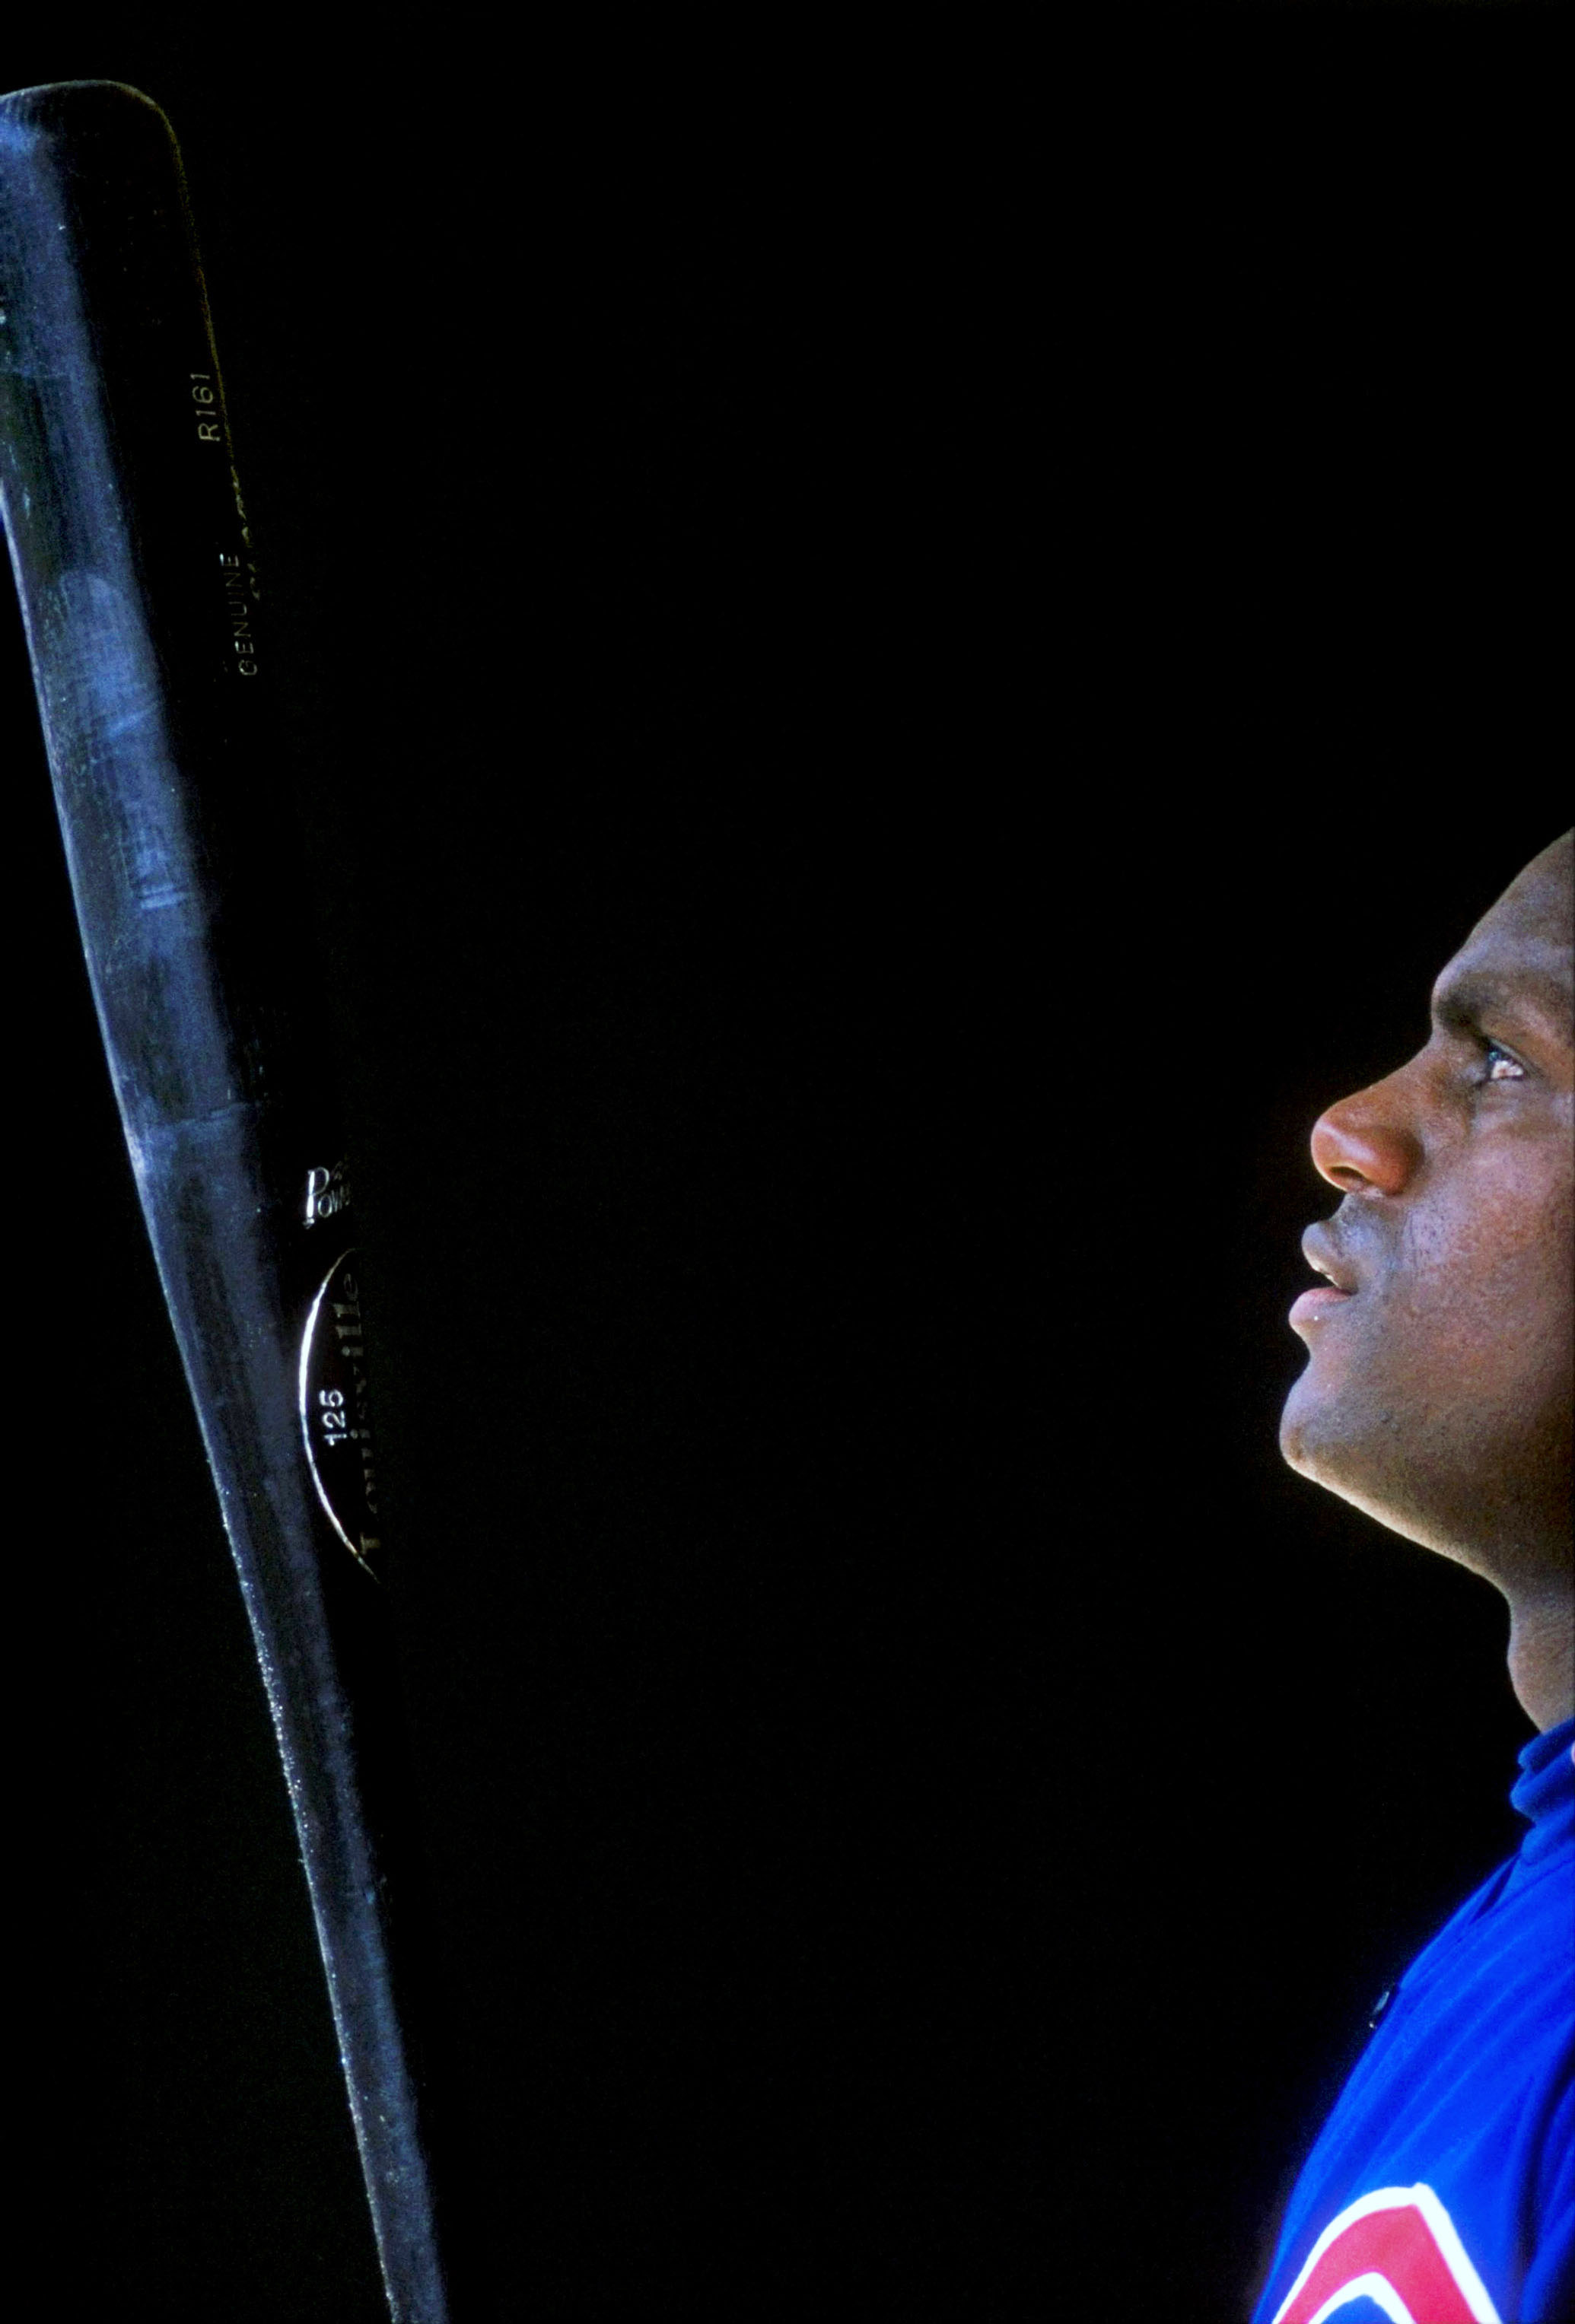 St. LOUIS - AUG 9:  (FILE PHOTO)  Sammy Sosa #21 of the Chicago Cubs looks at his bat in the dugout before an at-bat against the St. Louis Cardinals August 9, 1998 at Busch Stadium in St. Louis, Missouri. Sosa was caught using a corked bat during a game a